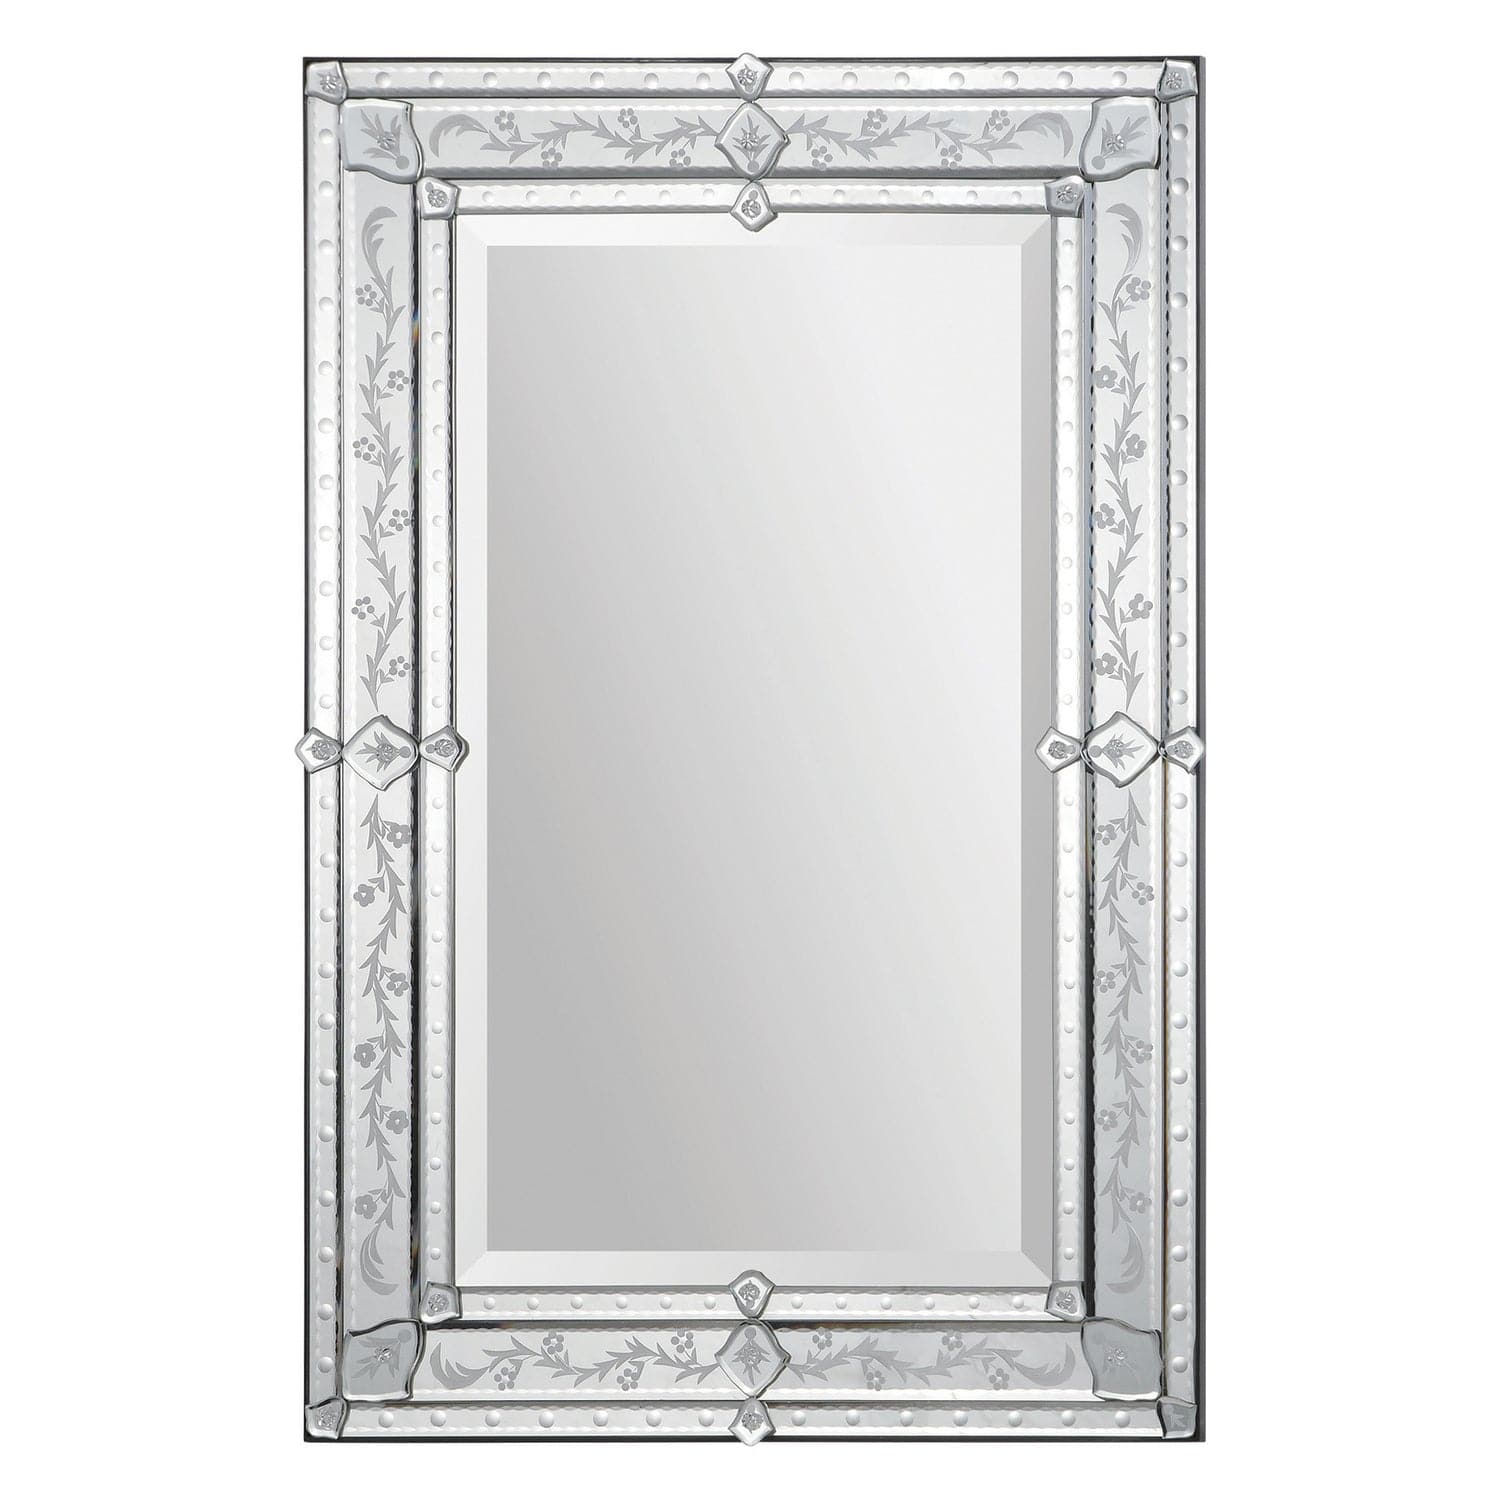 Renwil - MT1301 - Mirror - Vincenzo - All Glass